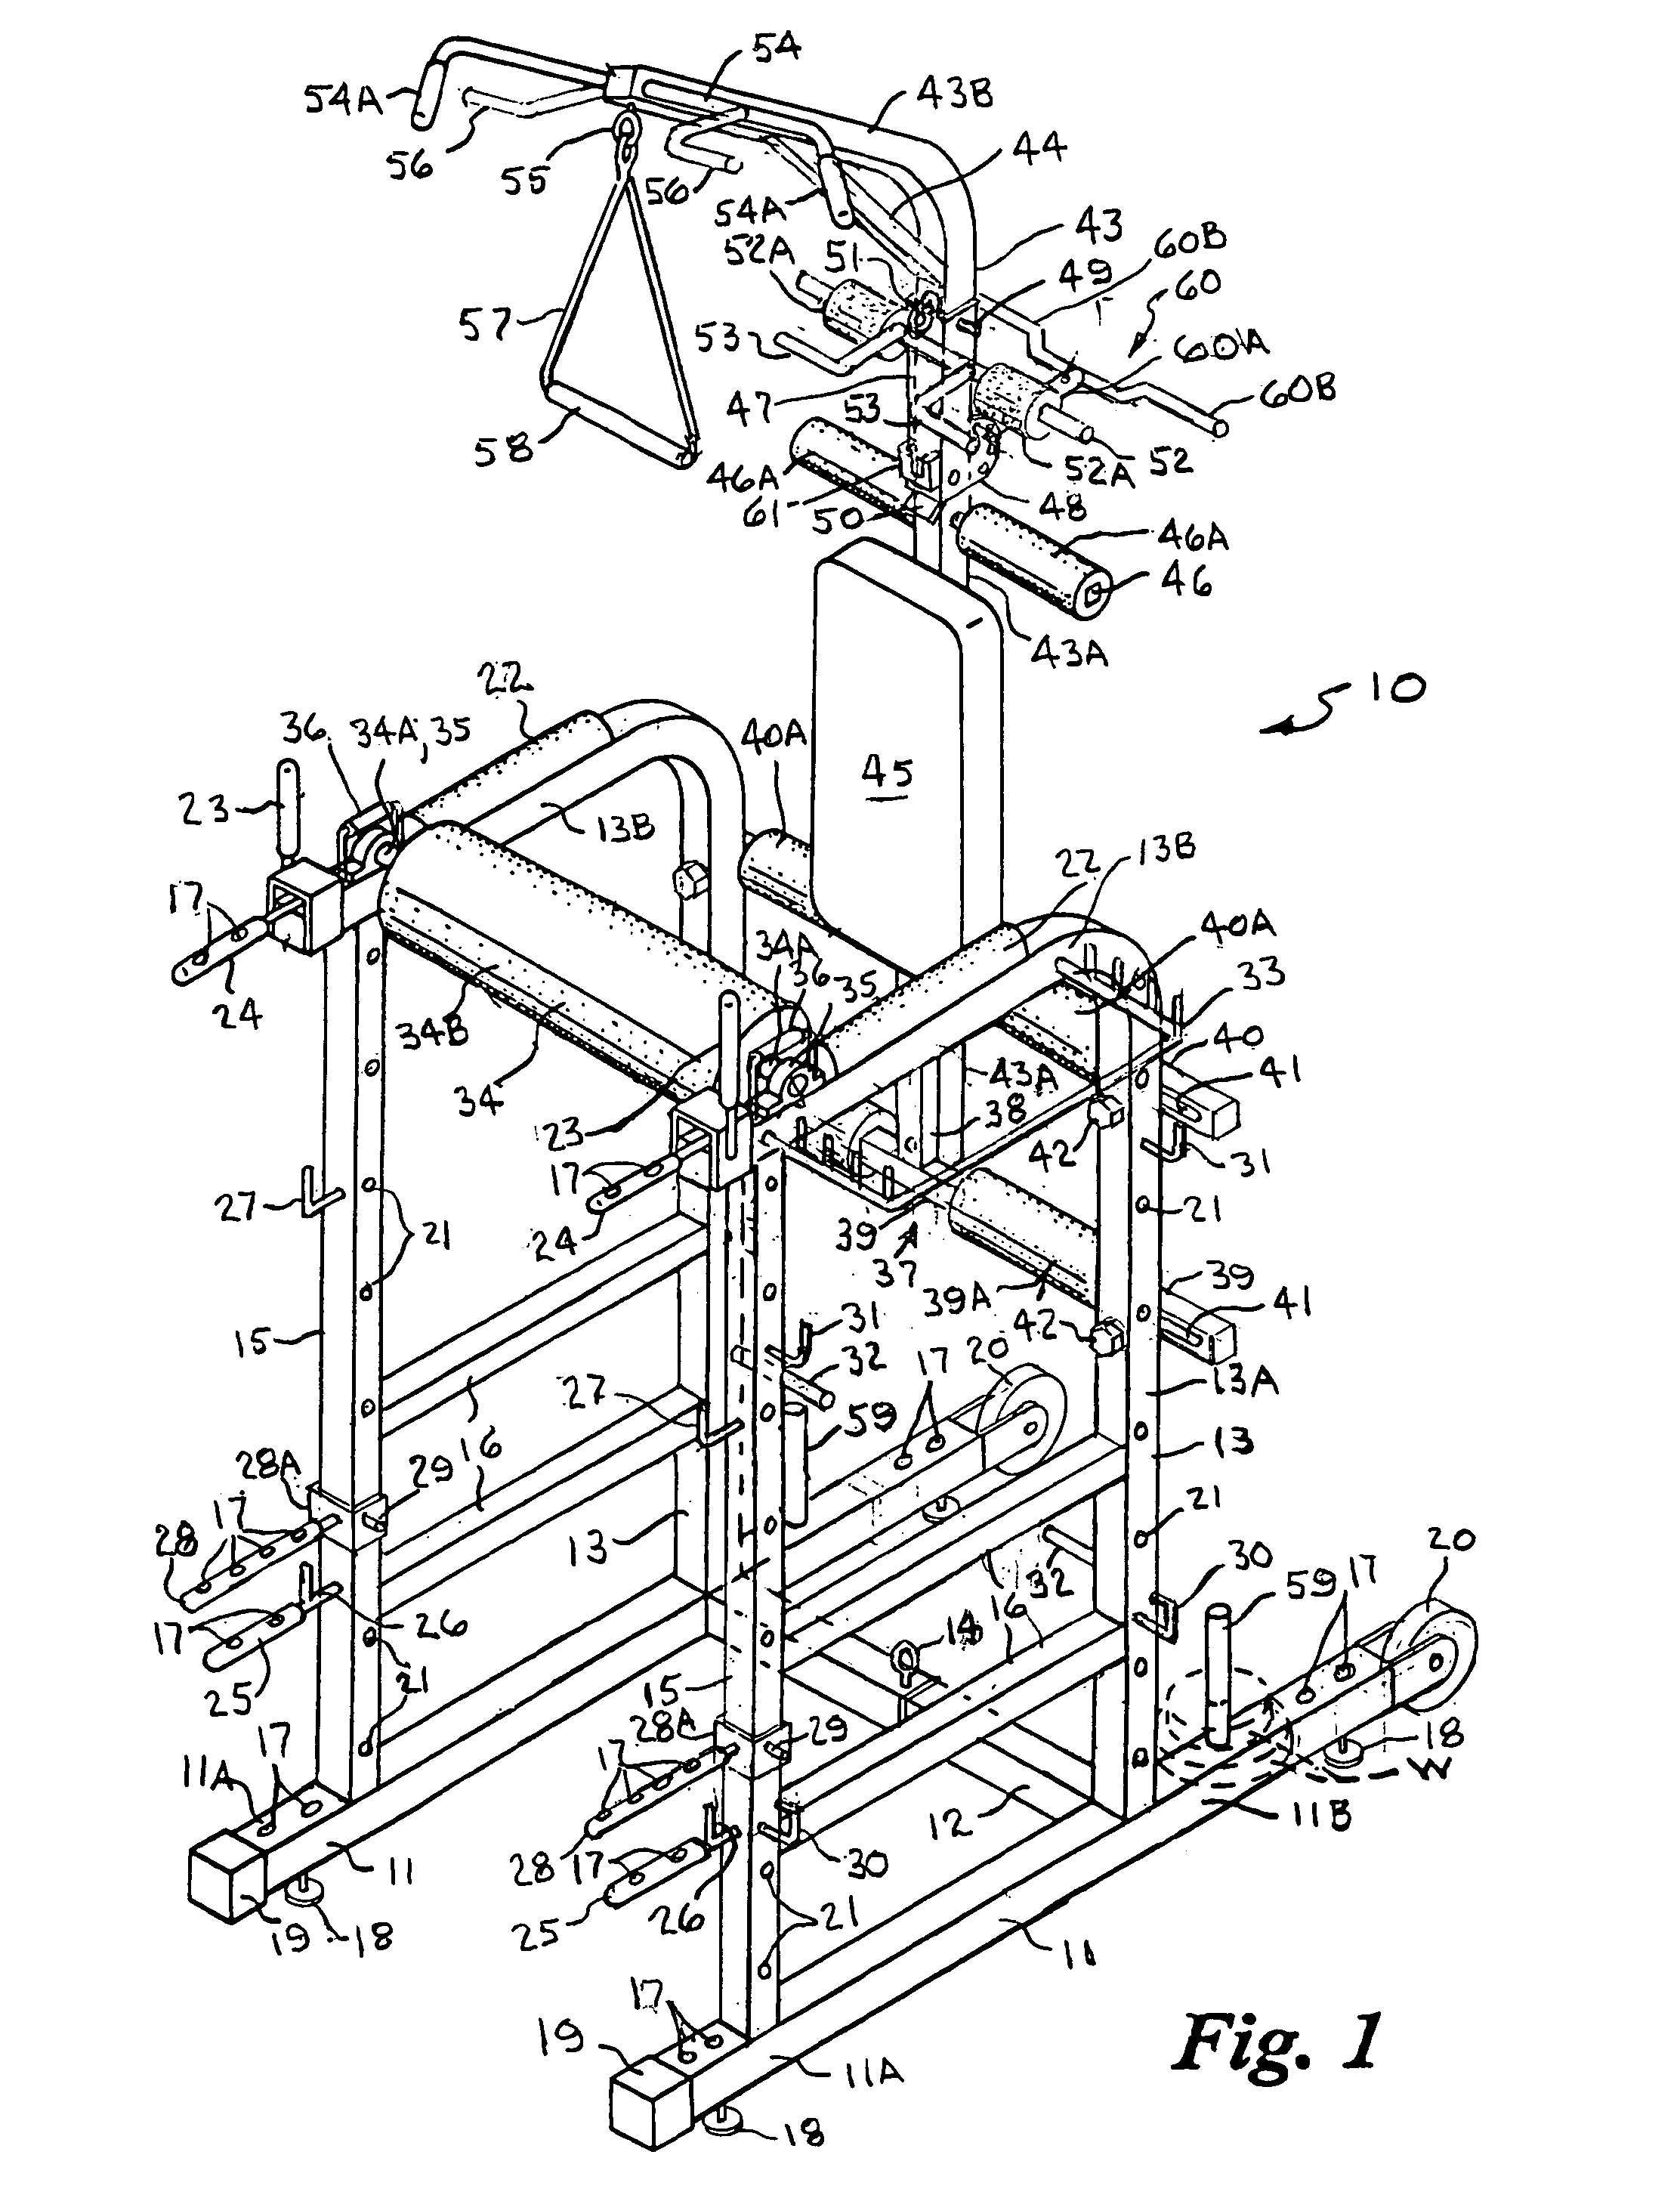 Apparatus for back therapy and multiple exercises